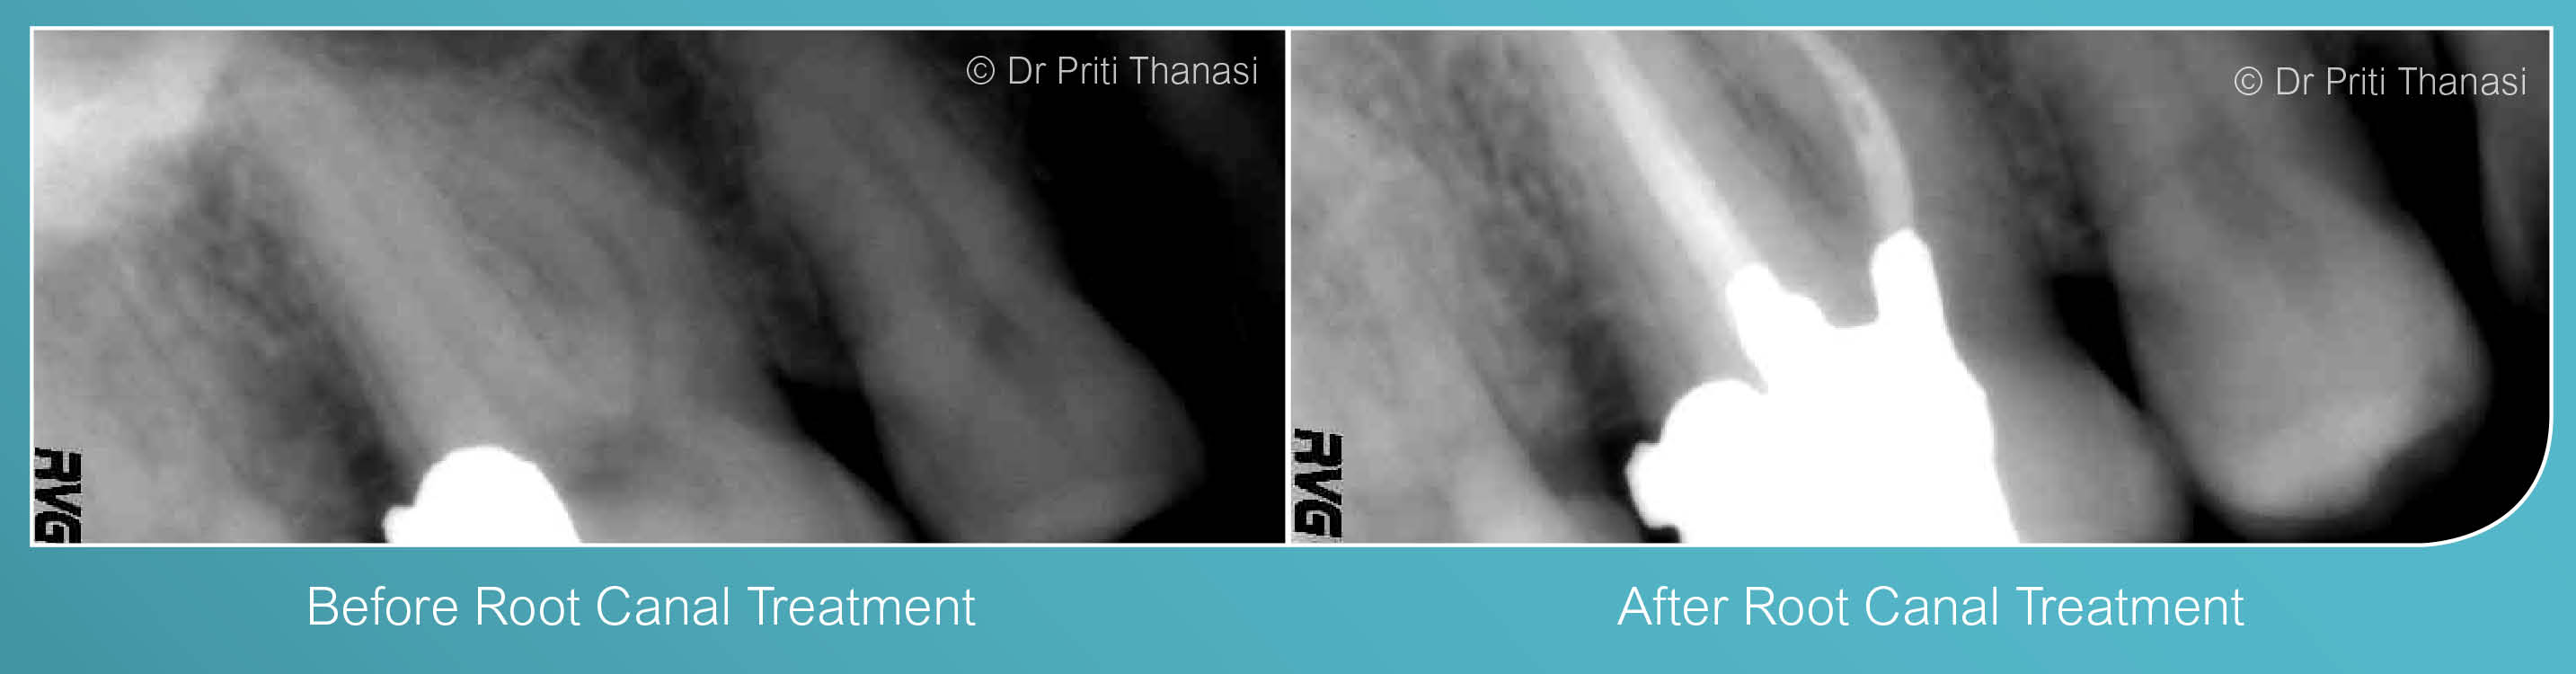 Before and after root canal treatment example 1